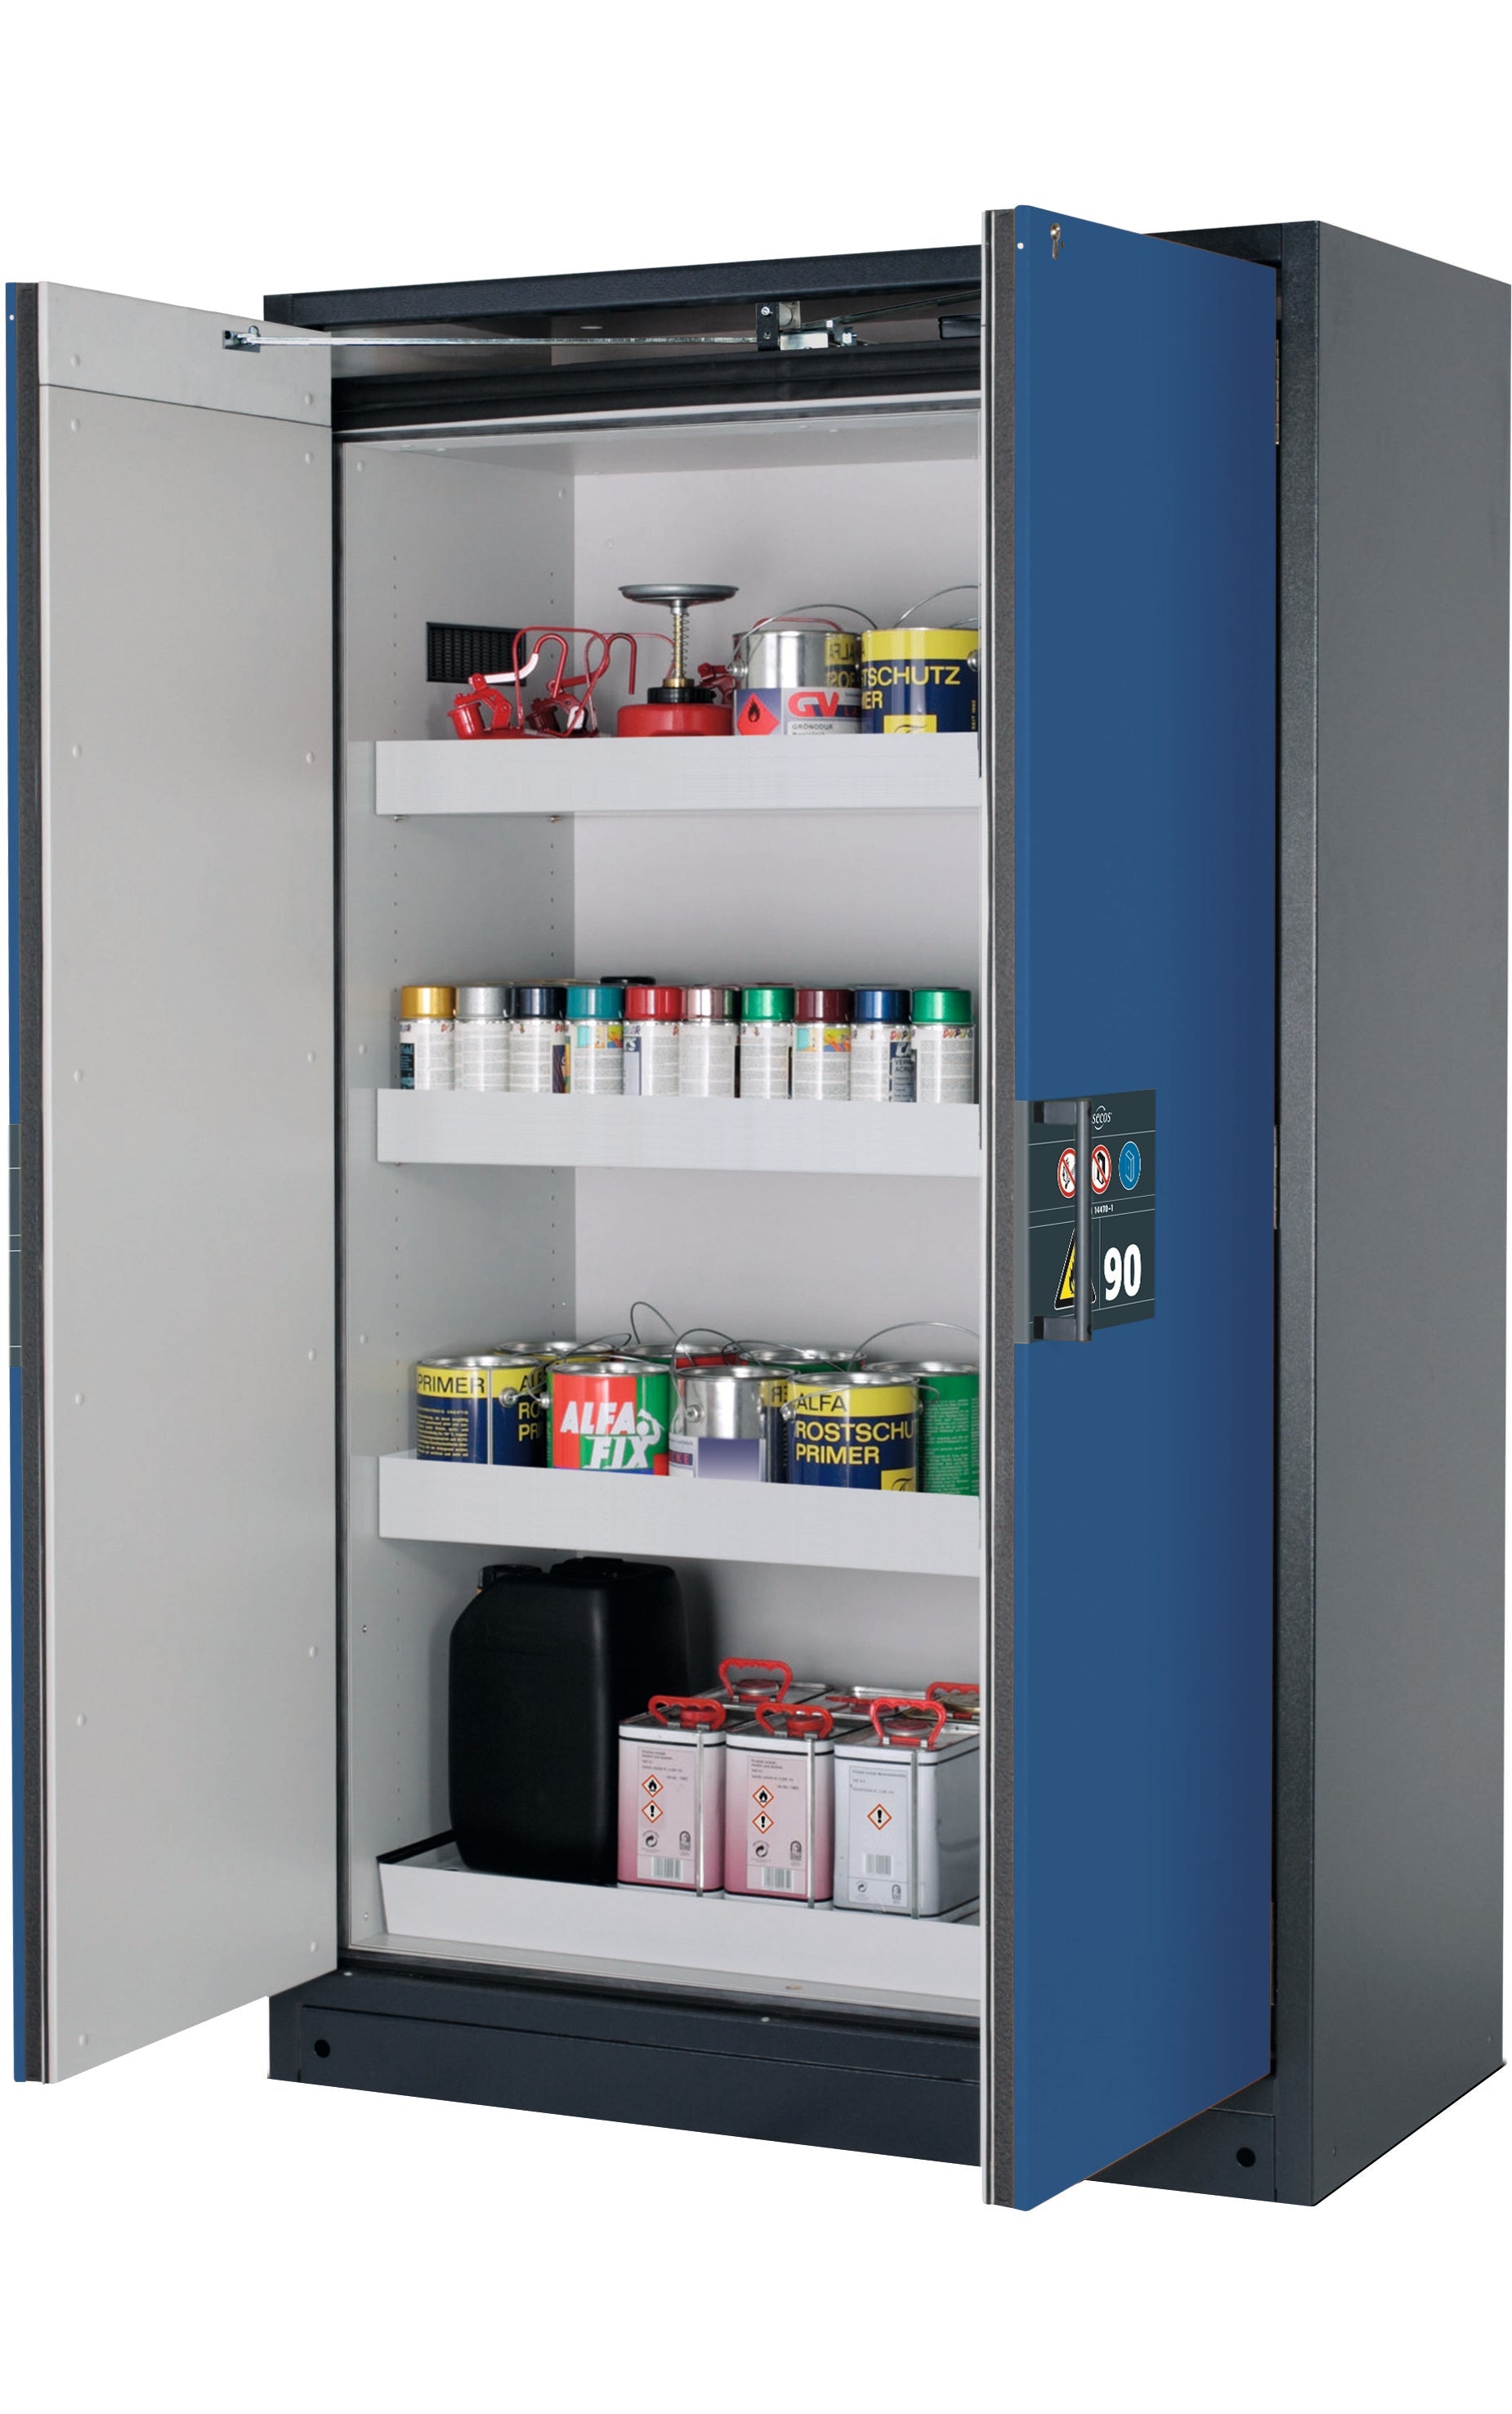 Type 90 safety storage cabinet Q-PEGASUS-90 model Q90.195.120.WDAC in gentian blue RAL 5010 with 3x tray shelf (standard) (sheet steel),